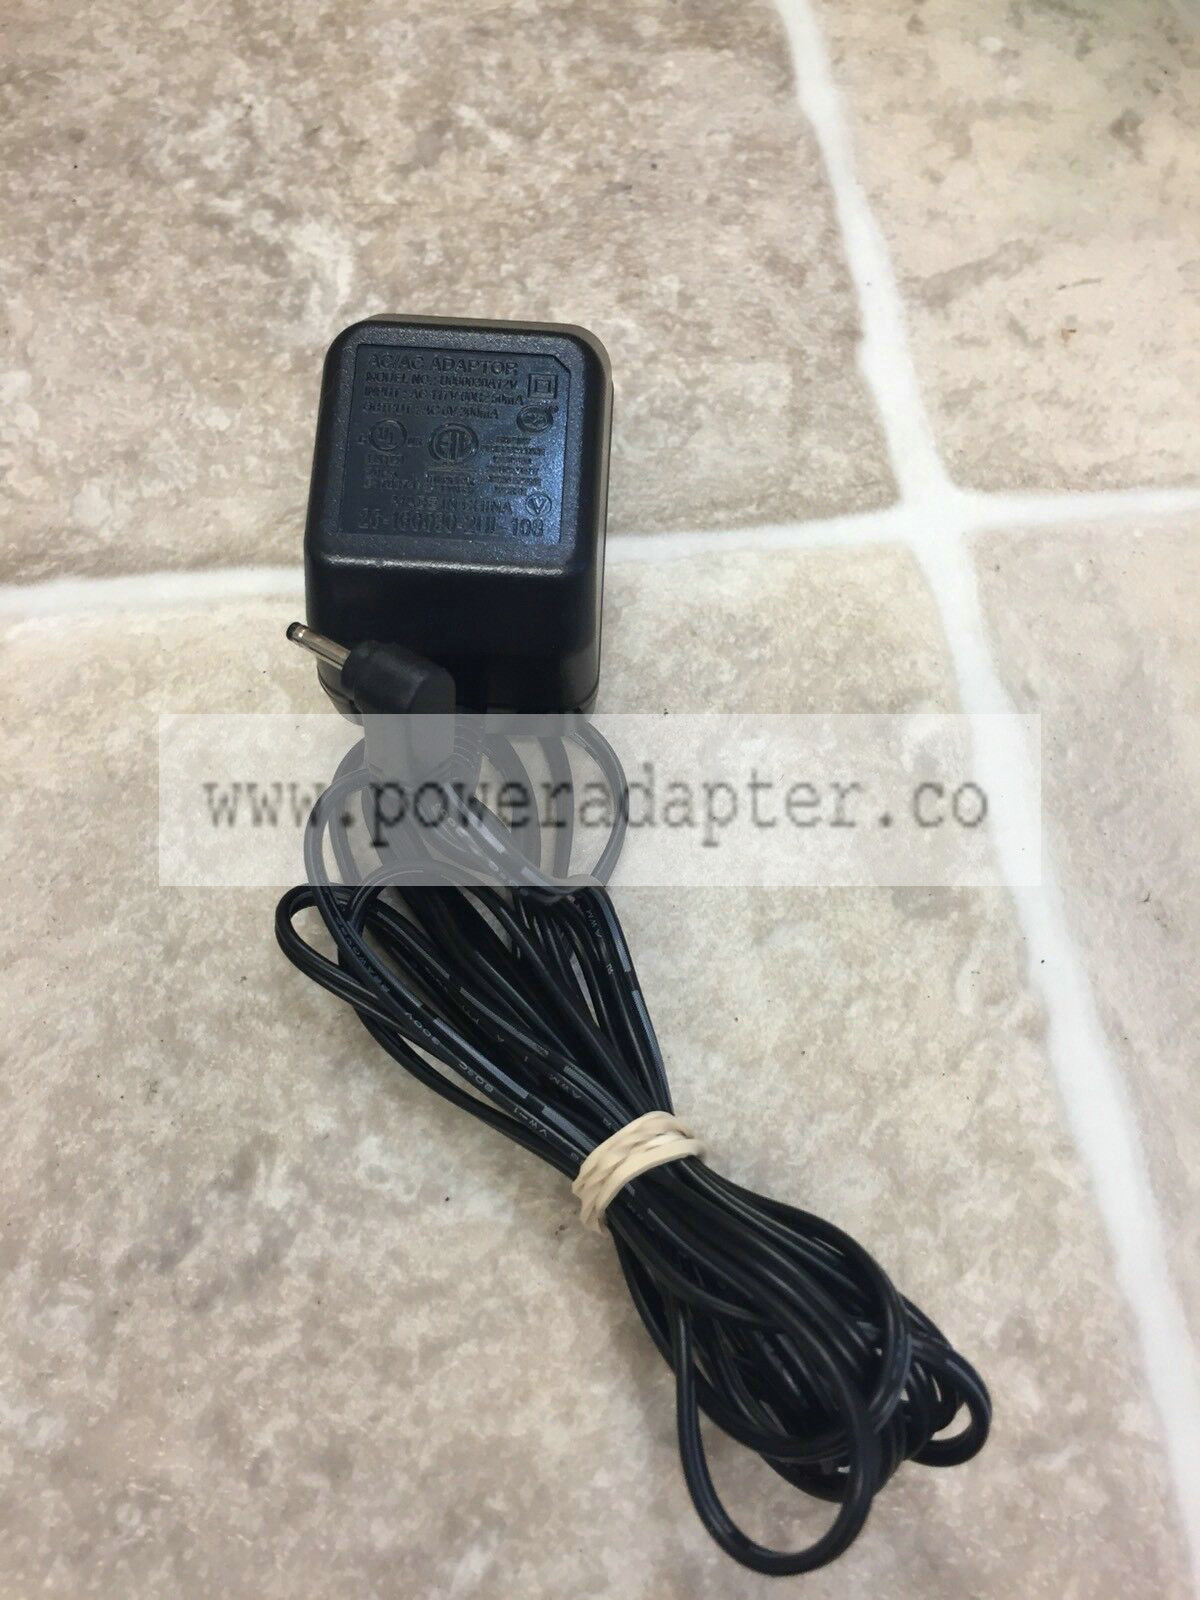 AT&T Power Adapter Model U060030A12V AT&T phone adapter. Model is U060030A12V. Smoke and pet free home. No damages or